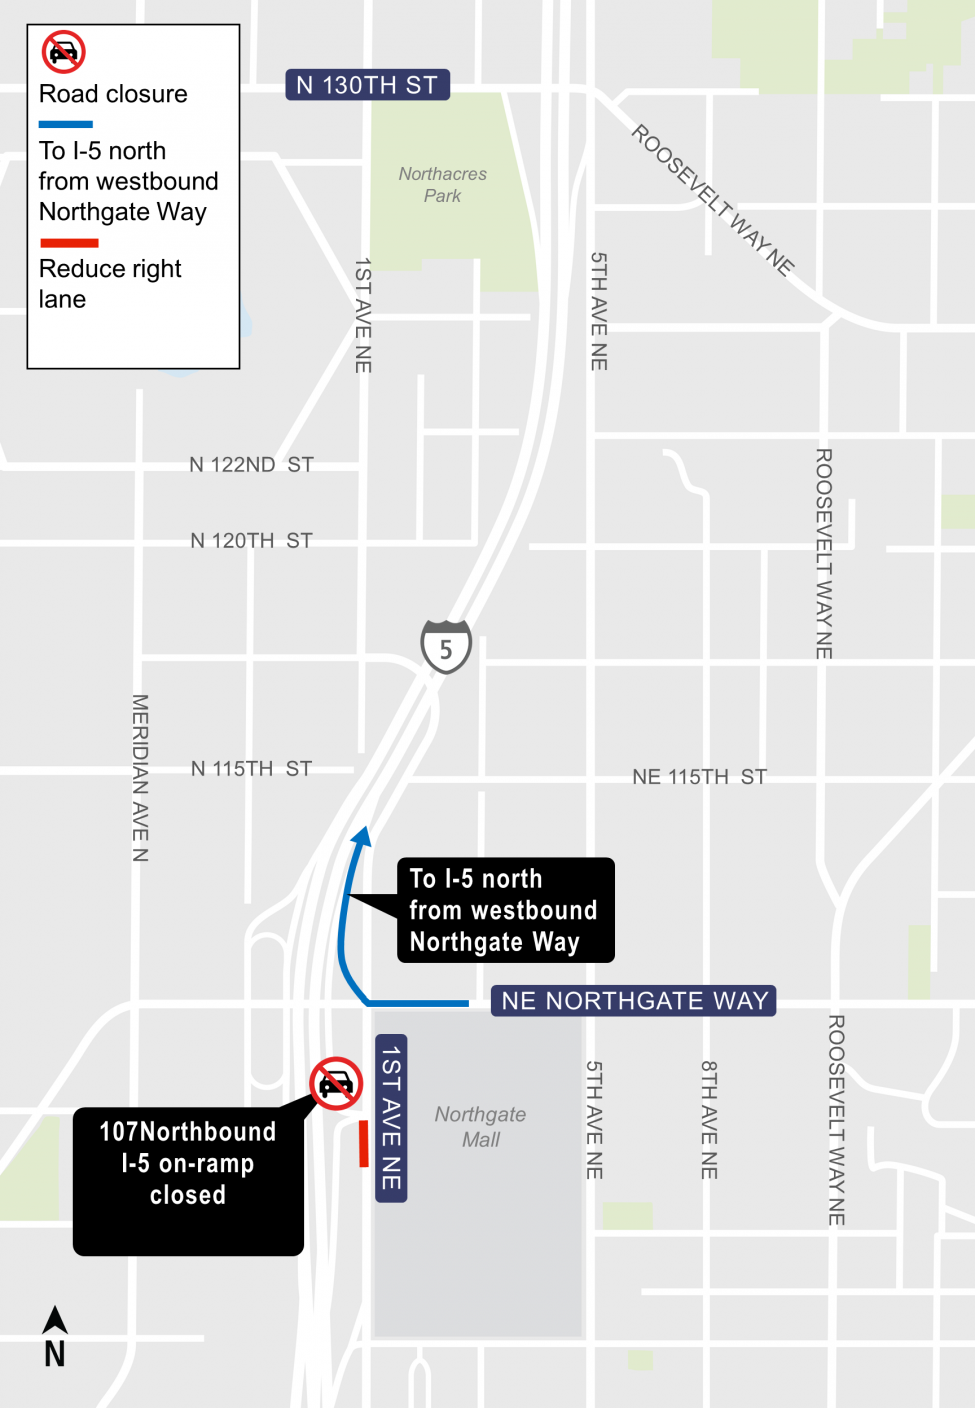 Map of Northeast 107 on-ramp to Interstate 5 closure in Northgate.